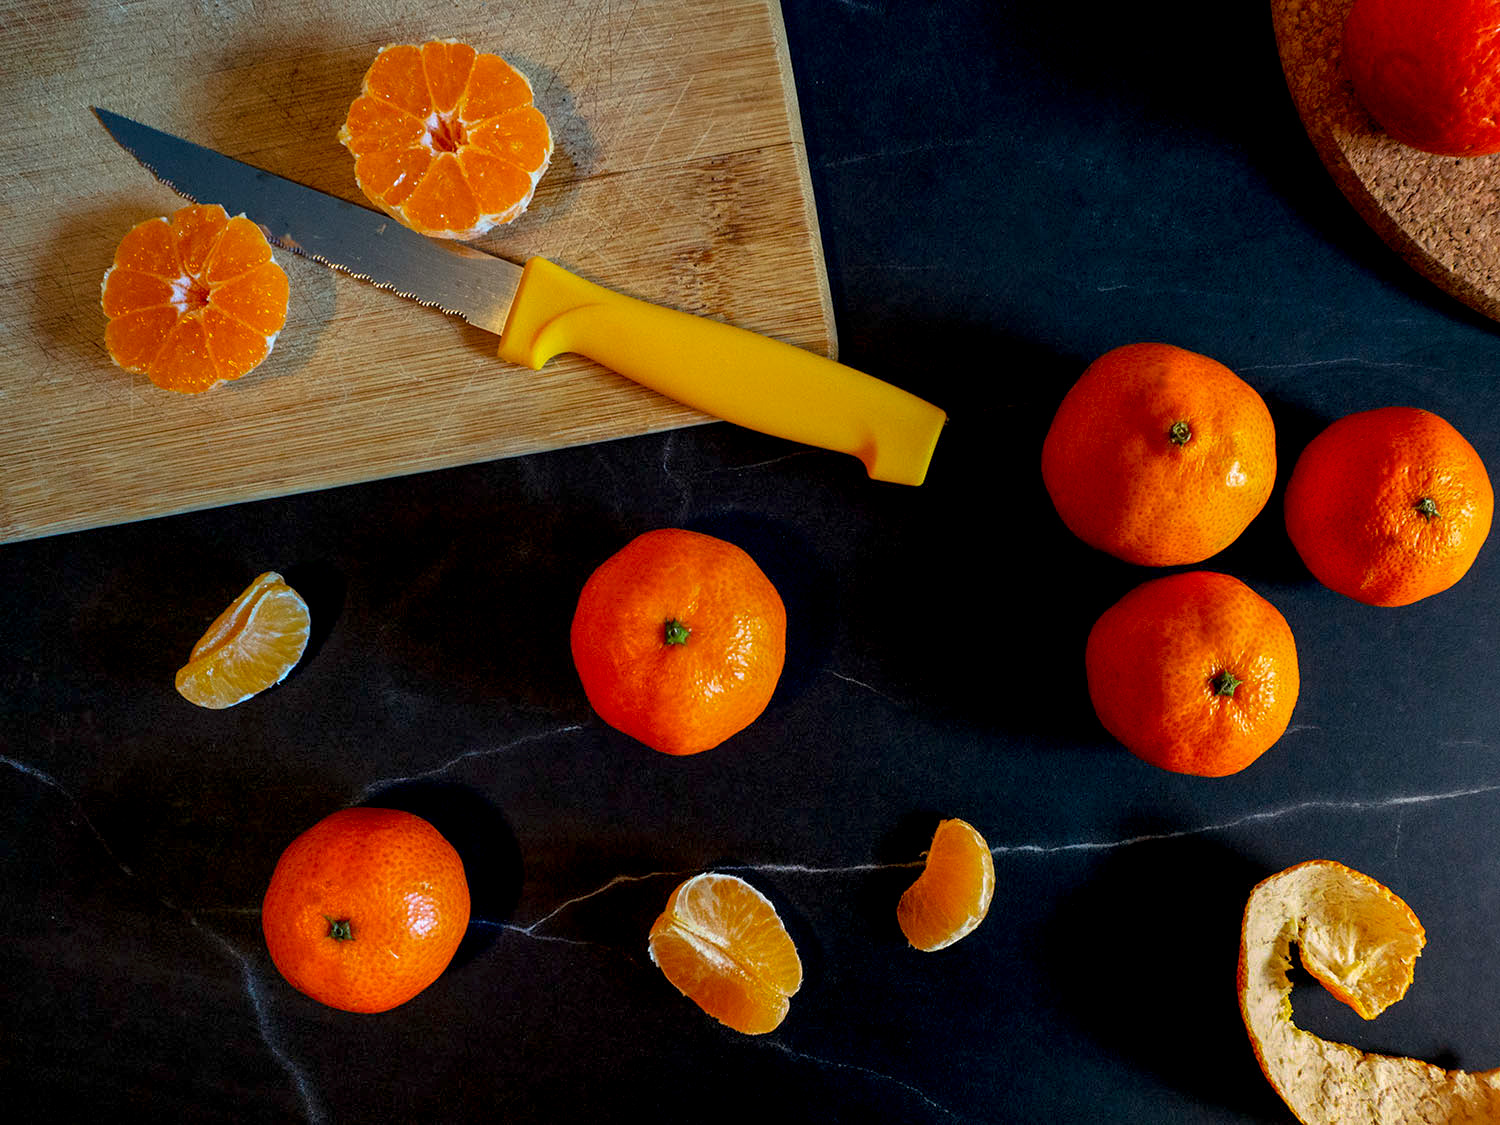 oranges and a knife on a table